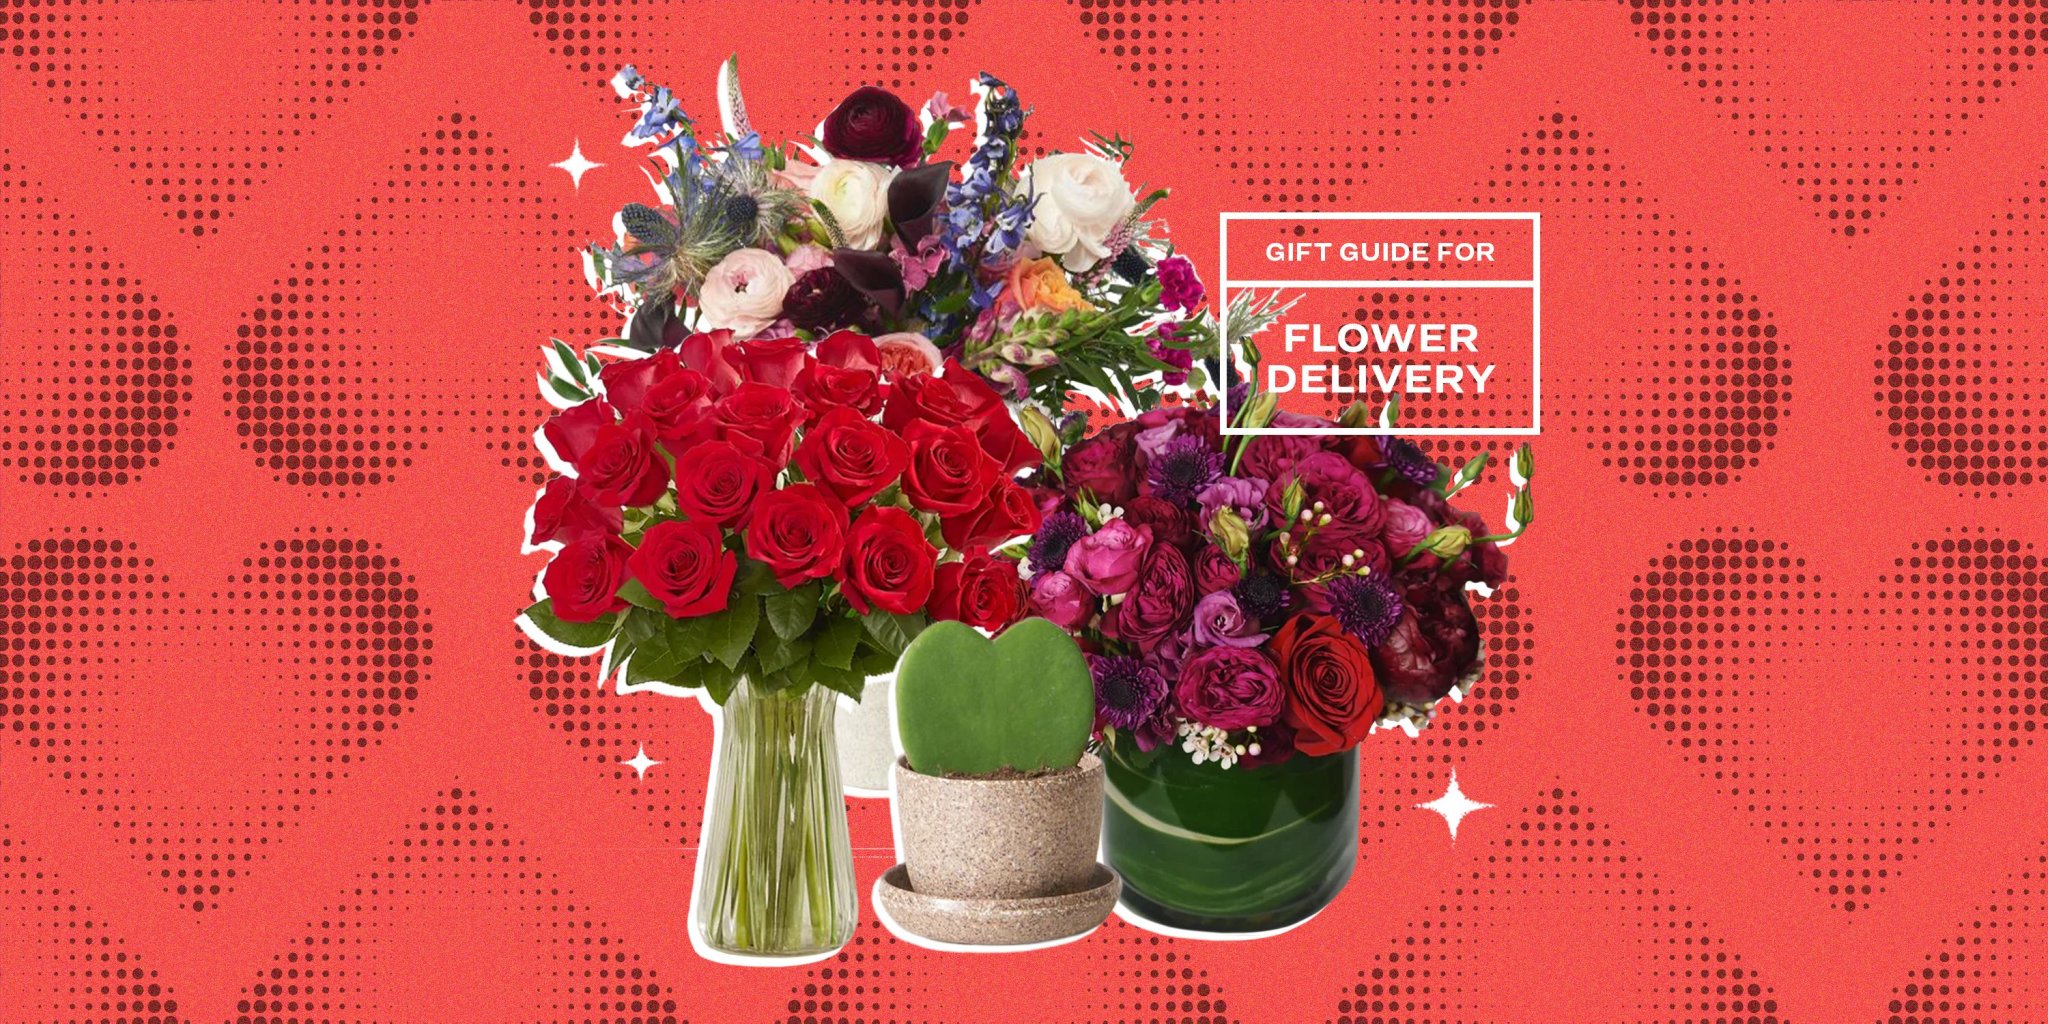 Need a Bouquet for Mother’s Day? These Are the Best Online Flower Delivery Services